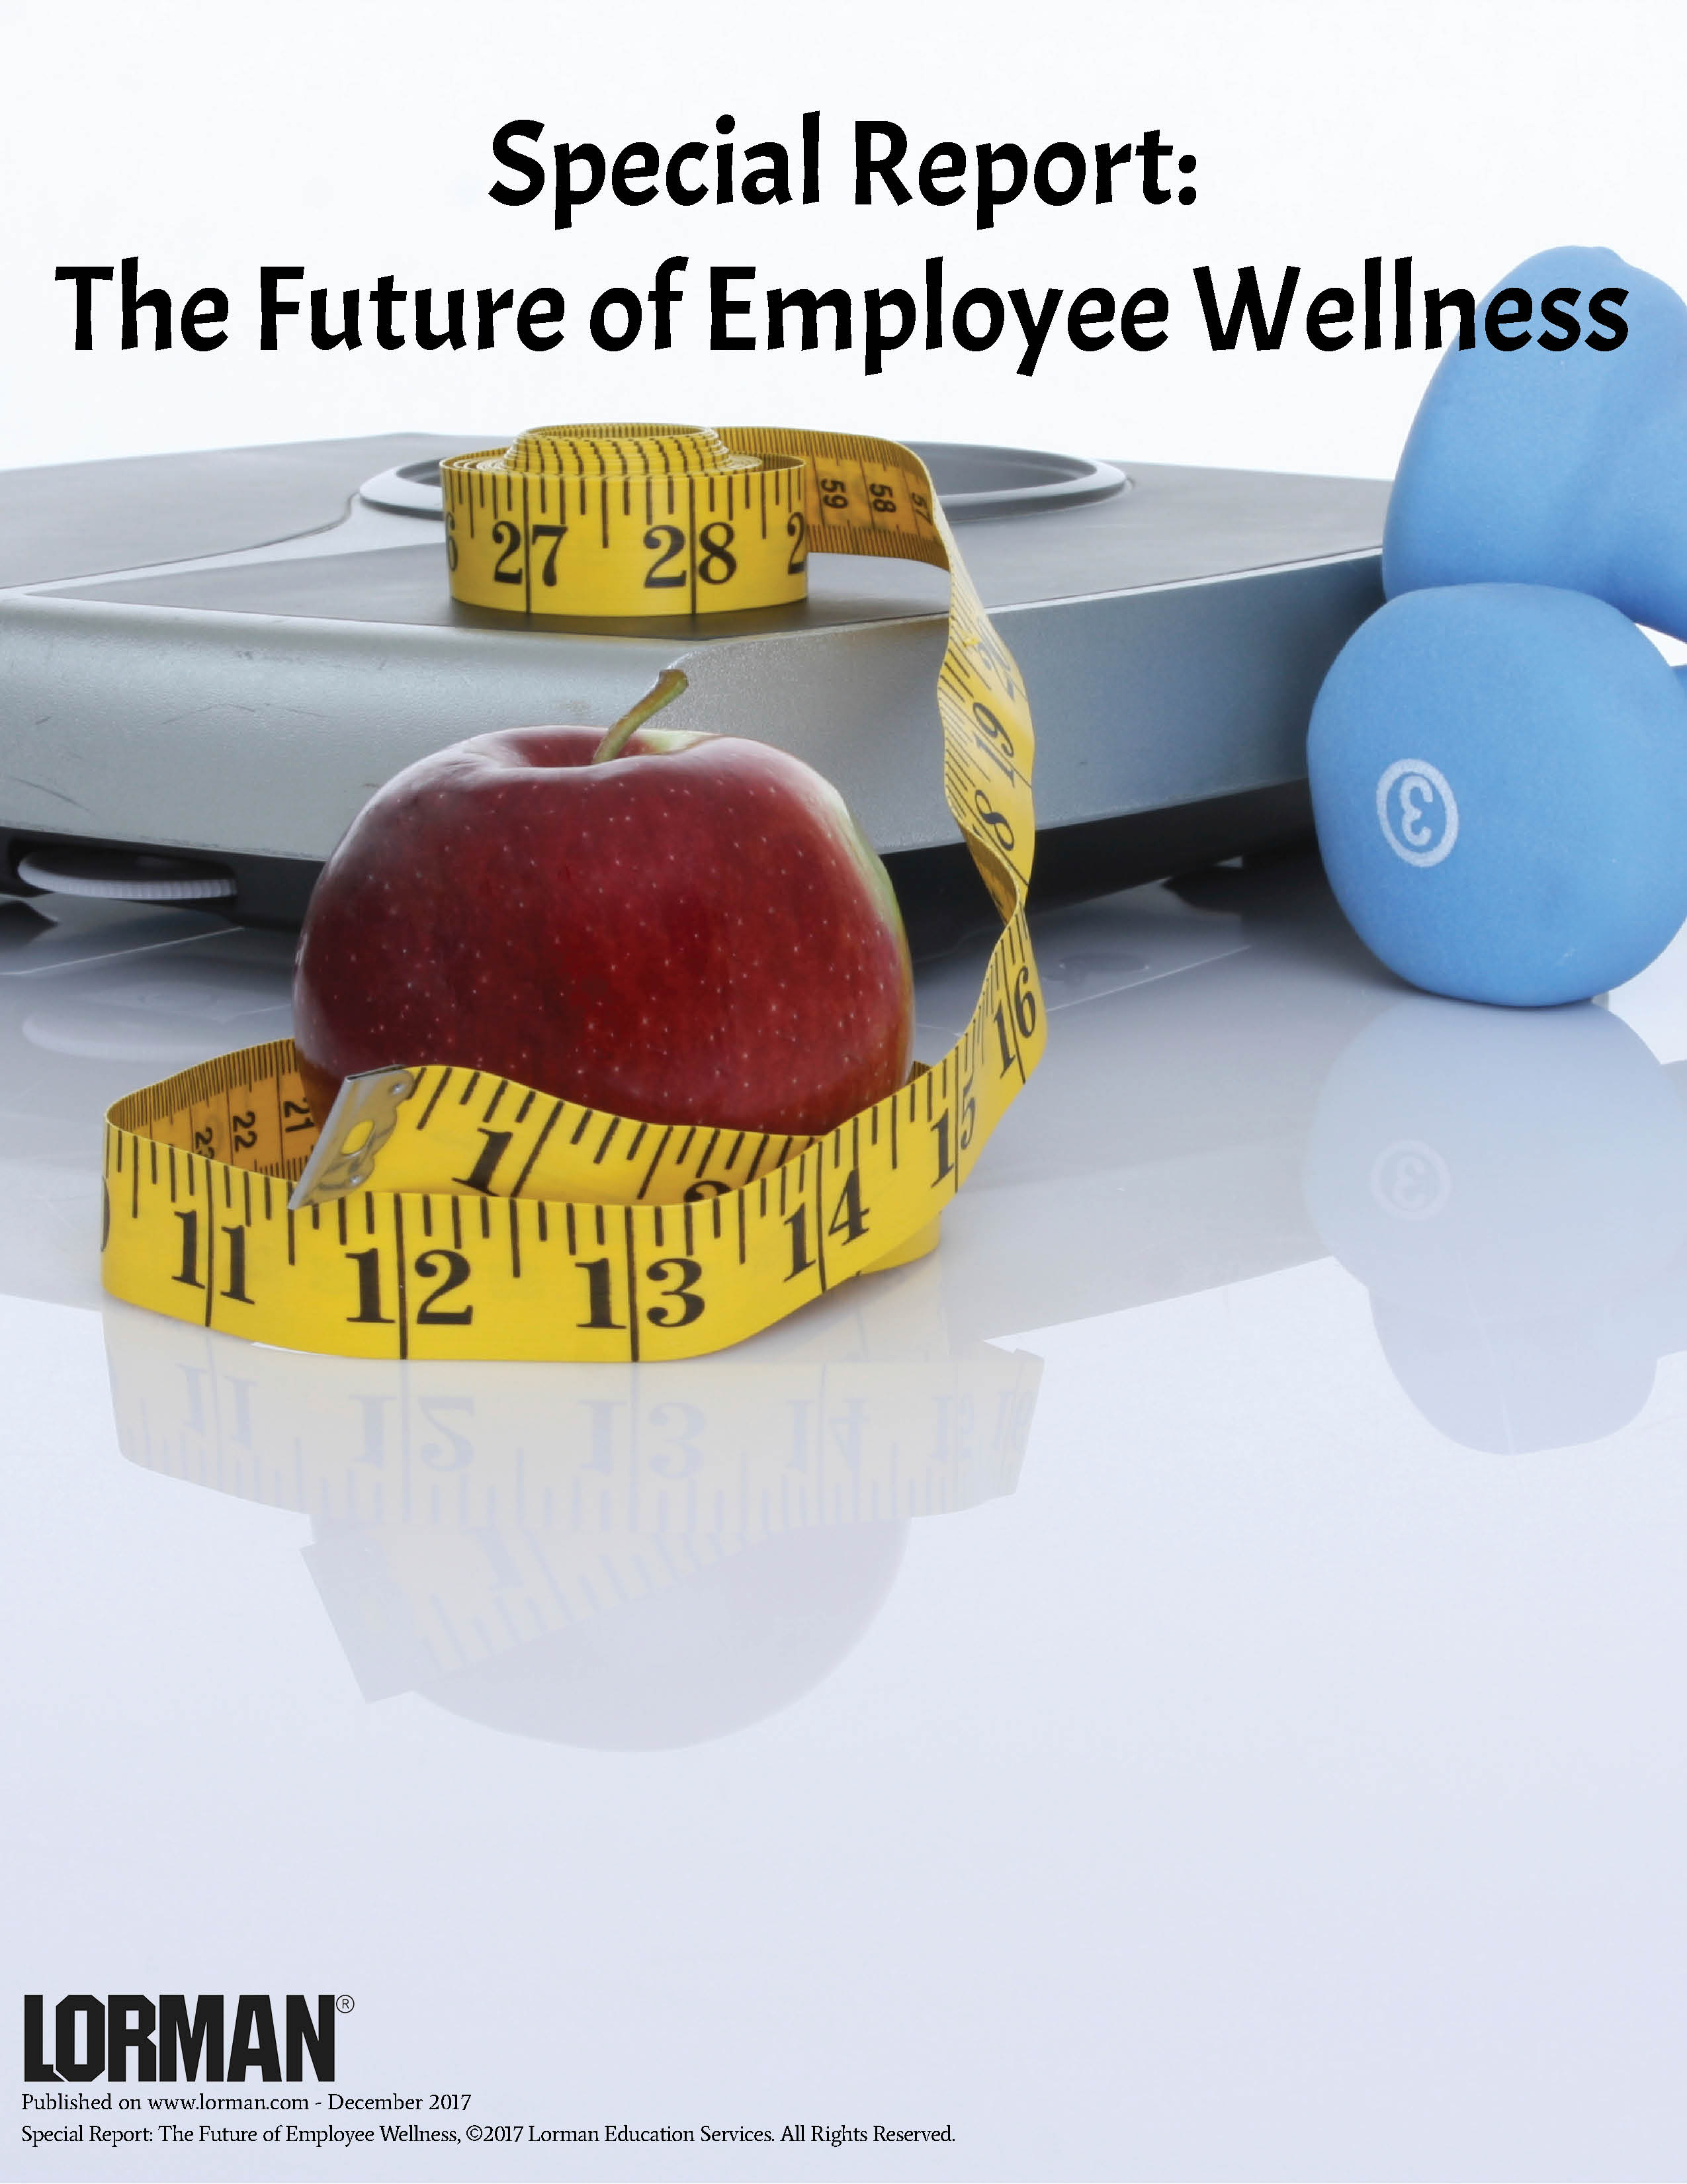 Special Report: The Future of Employee Wellness